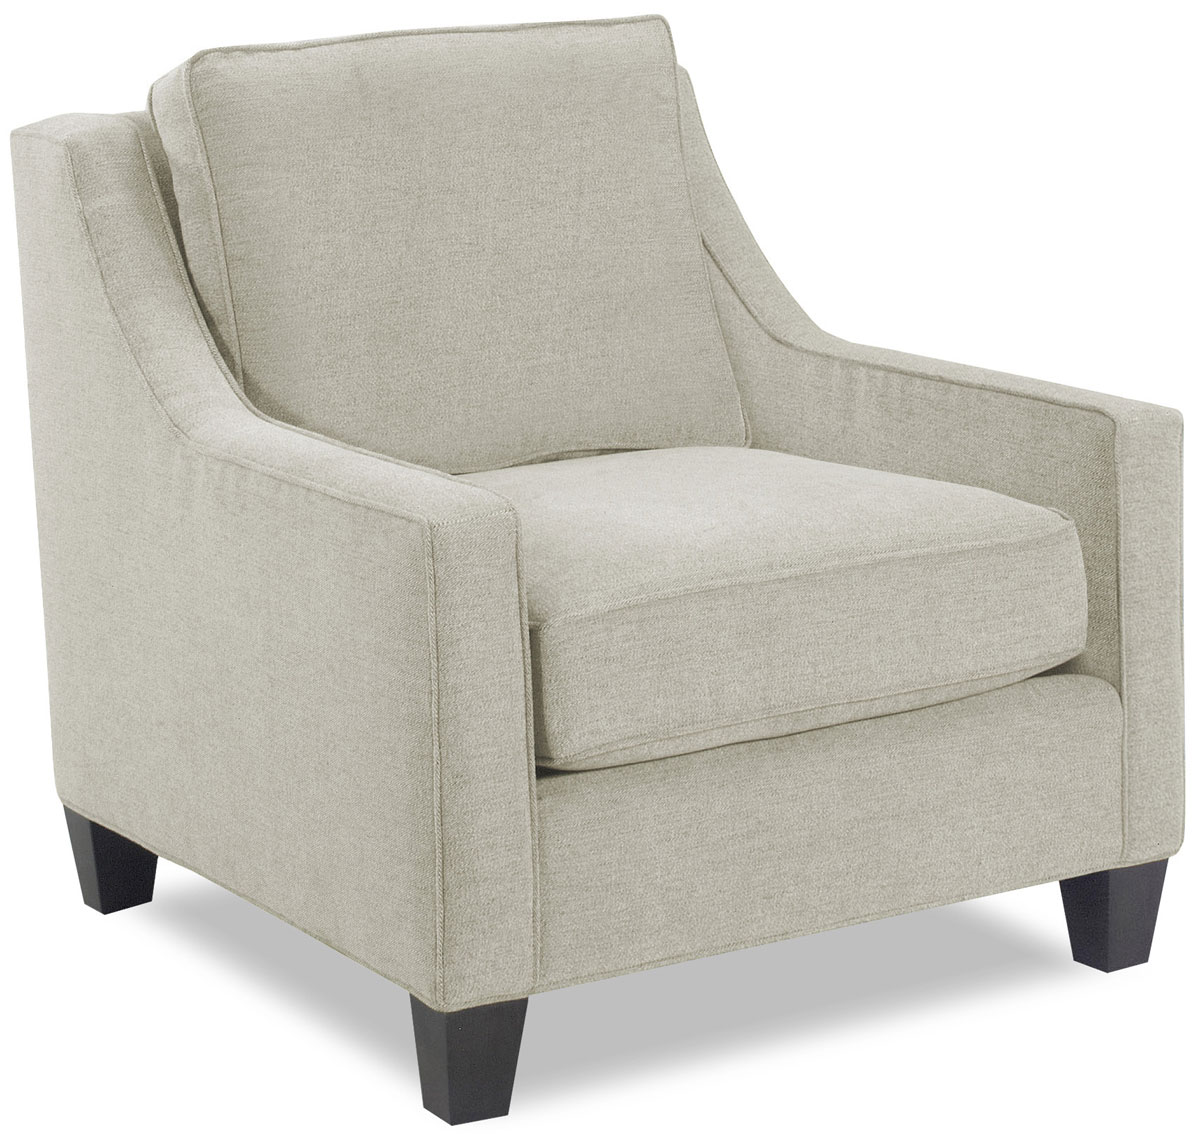 Temple Furniture 5205 Brody Chair with No Buttons